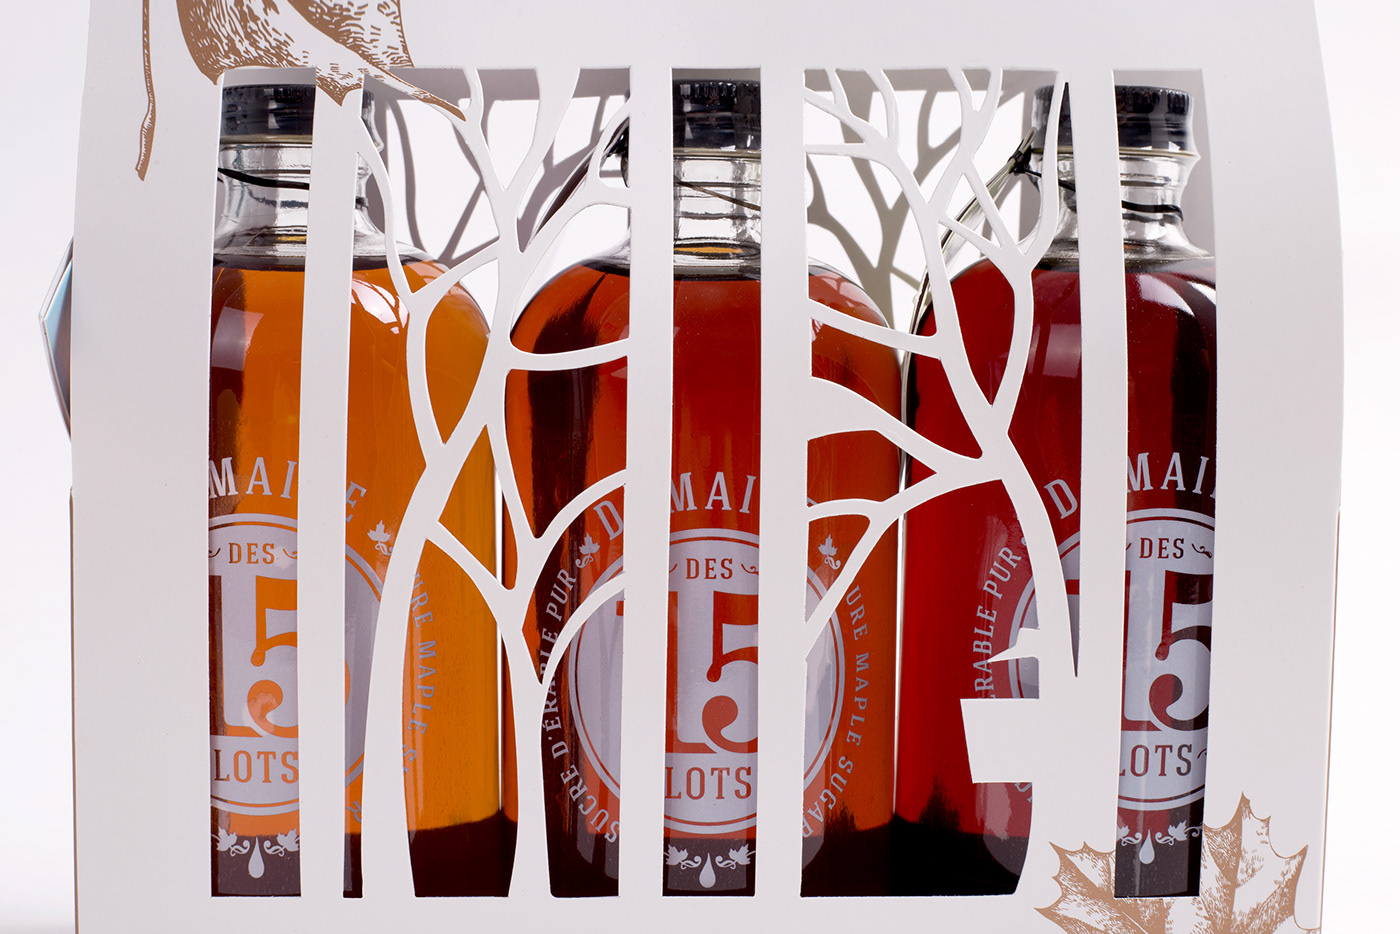 Packaging design maple syrup domainedes15lots artdirectoin Quebec Canada